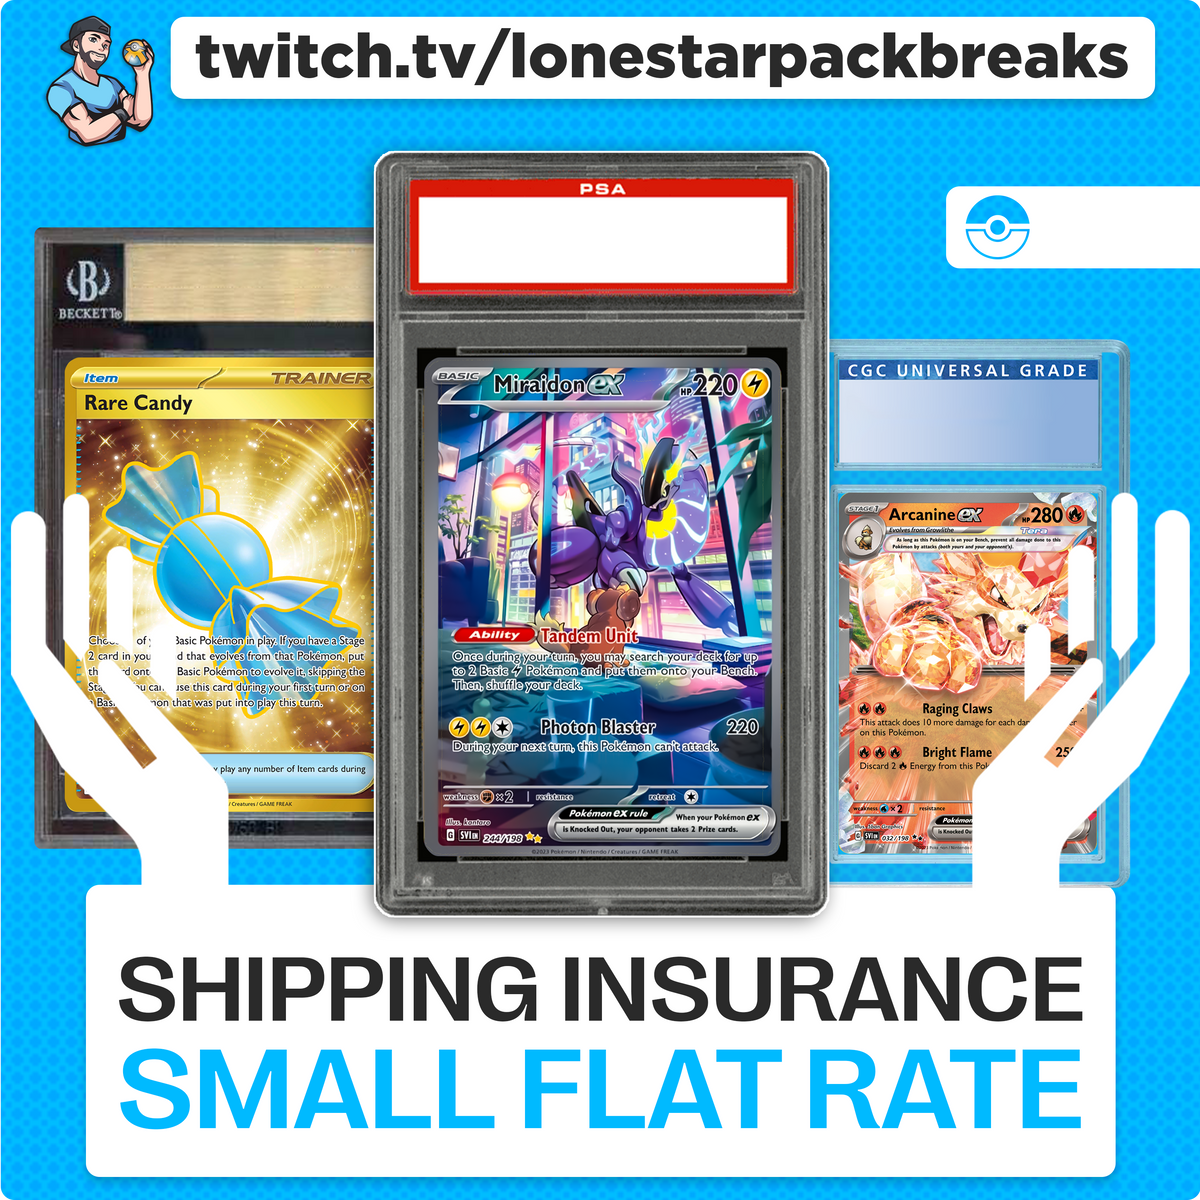 Shipping Insurance-Small Flate Rate (up to 5 breaks or 5 slabs)